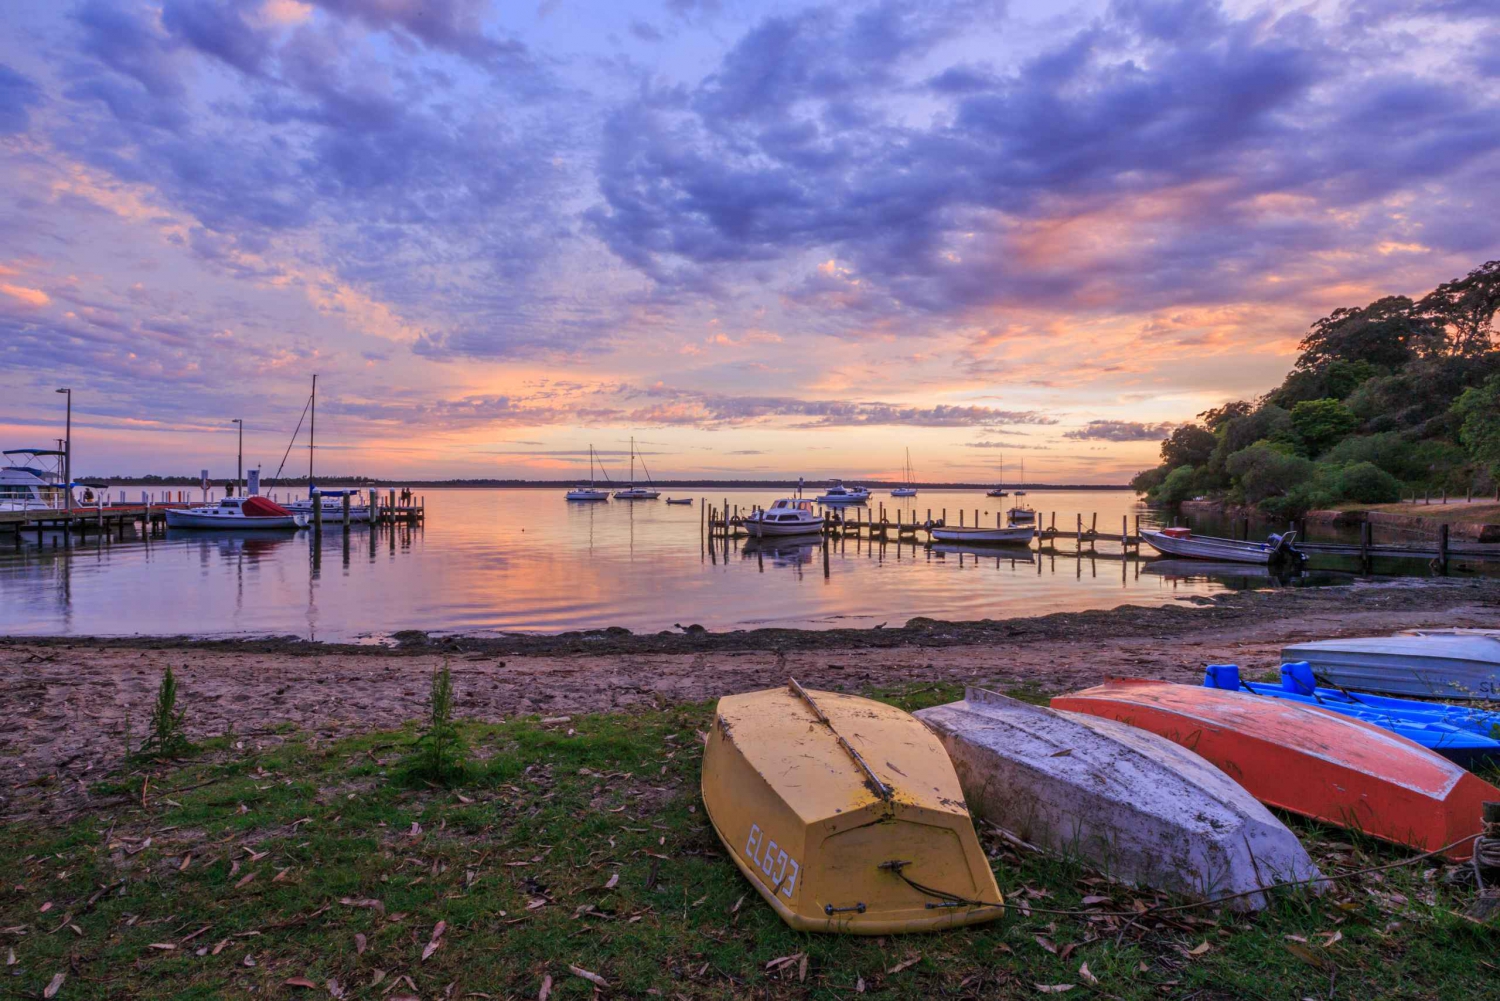 From Melbourne: 5-Day Victorian Alps & Gippsland Lakes Trip